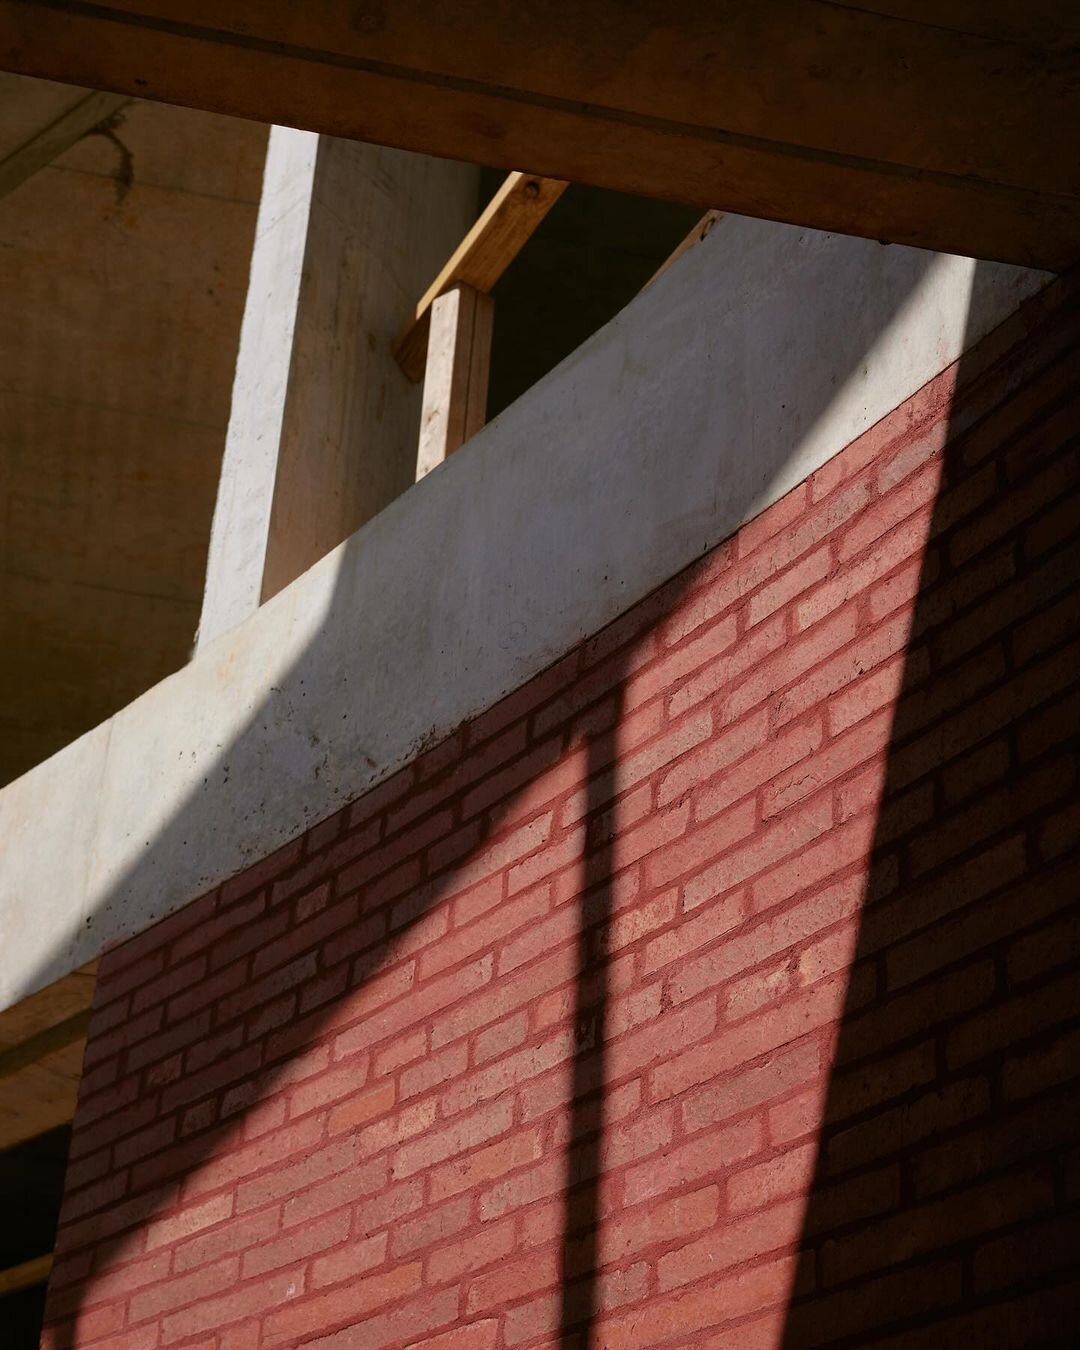 @alex_reinders recently captured these on-site snaps from a residential project in Brighton, Victoria. The texture and vibrancy of the Krause Emperor Bricks in Heritage Red are a standout feature of the build.

Photos: @alex_reinders
Design: @matyasa